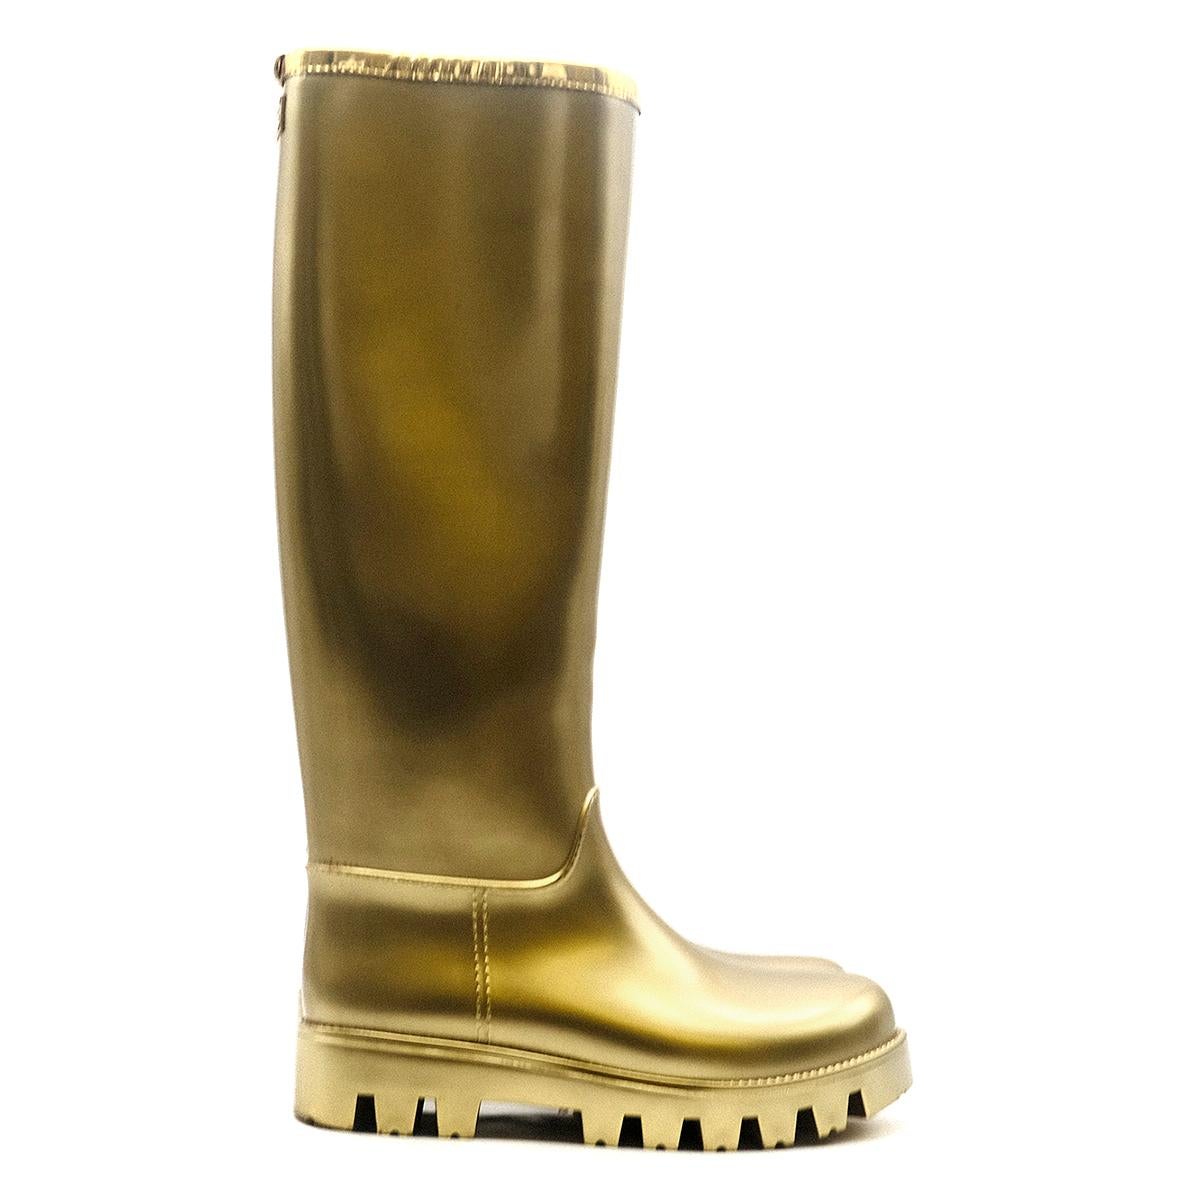 Dolce & Gabbana Gold Rubber Wellington Boots

- Knee High 
- PVC
- Gold Color 
- Rubber sole
- Logo details at top back 

Please note, these items are pre-owned and may show some signs of storage, even when unworn and unused. This is reflected